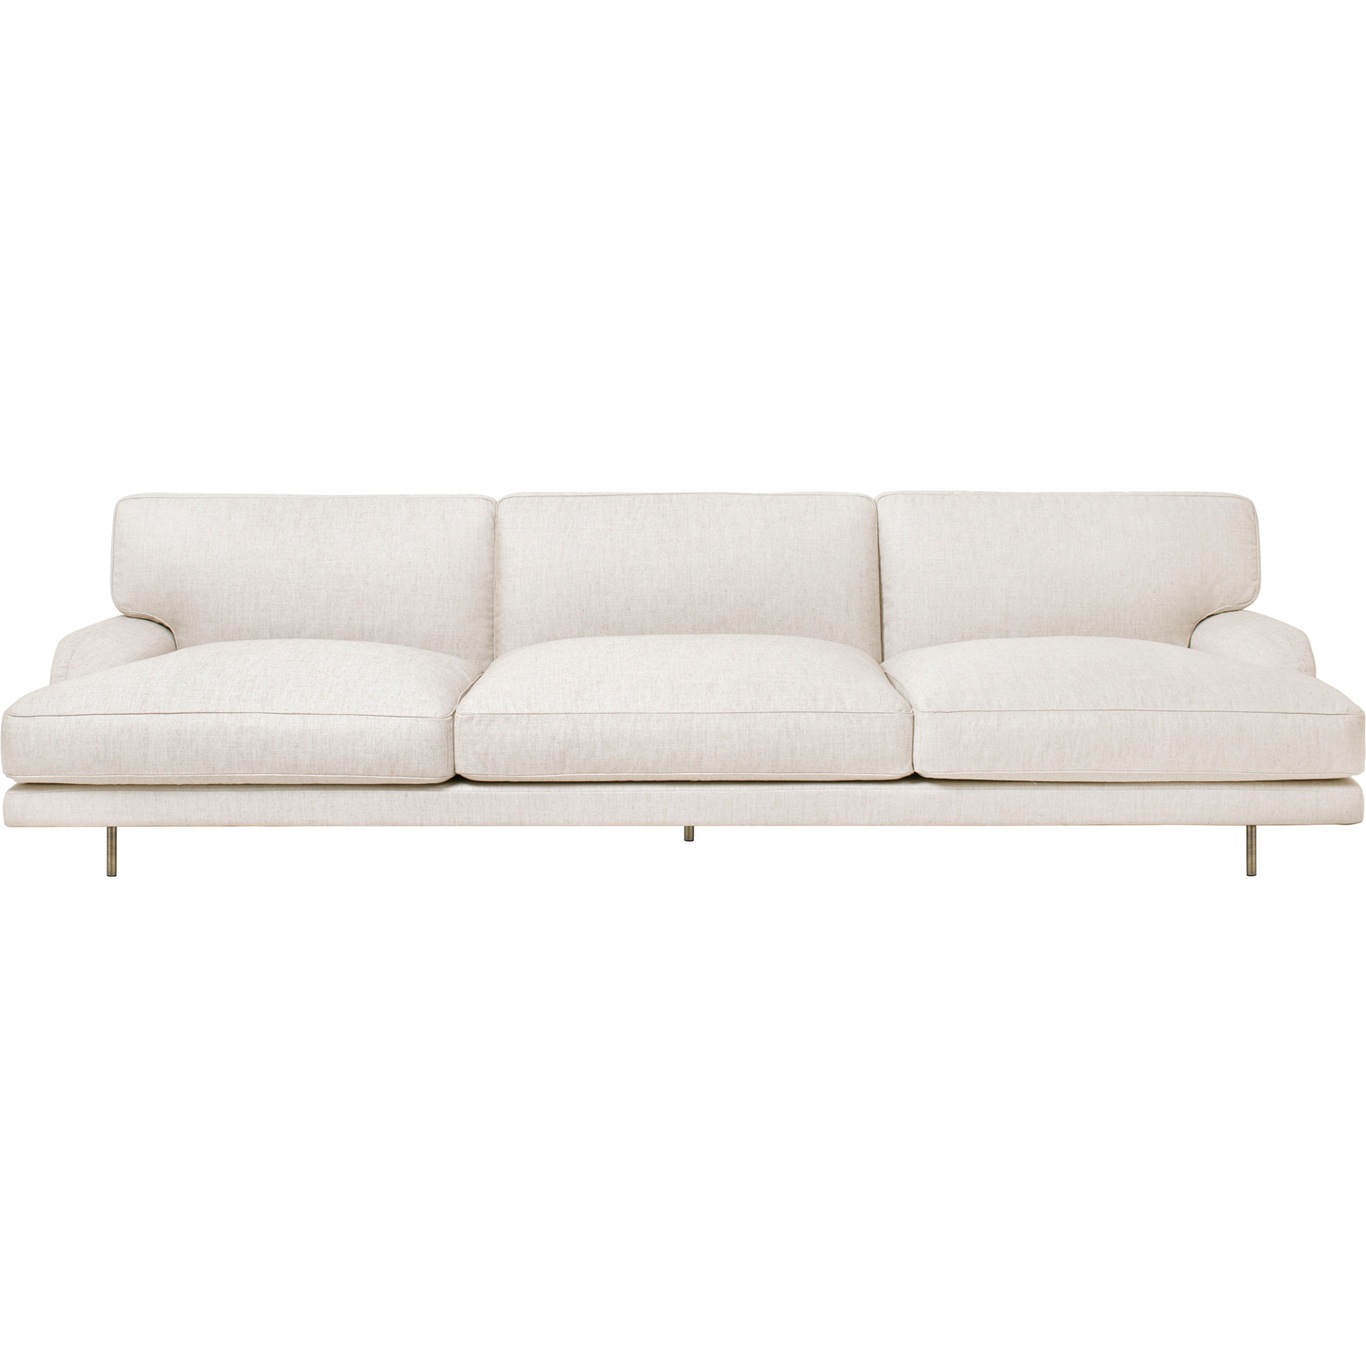 Flaneur Sofa FC 3-seters, Ben Messing / Hot Madison 419 Off White